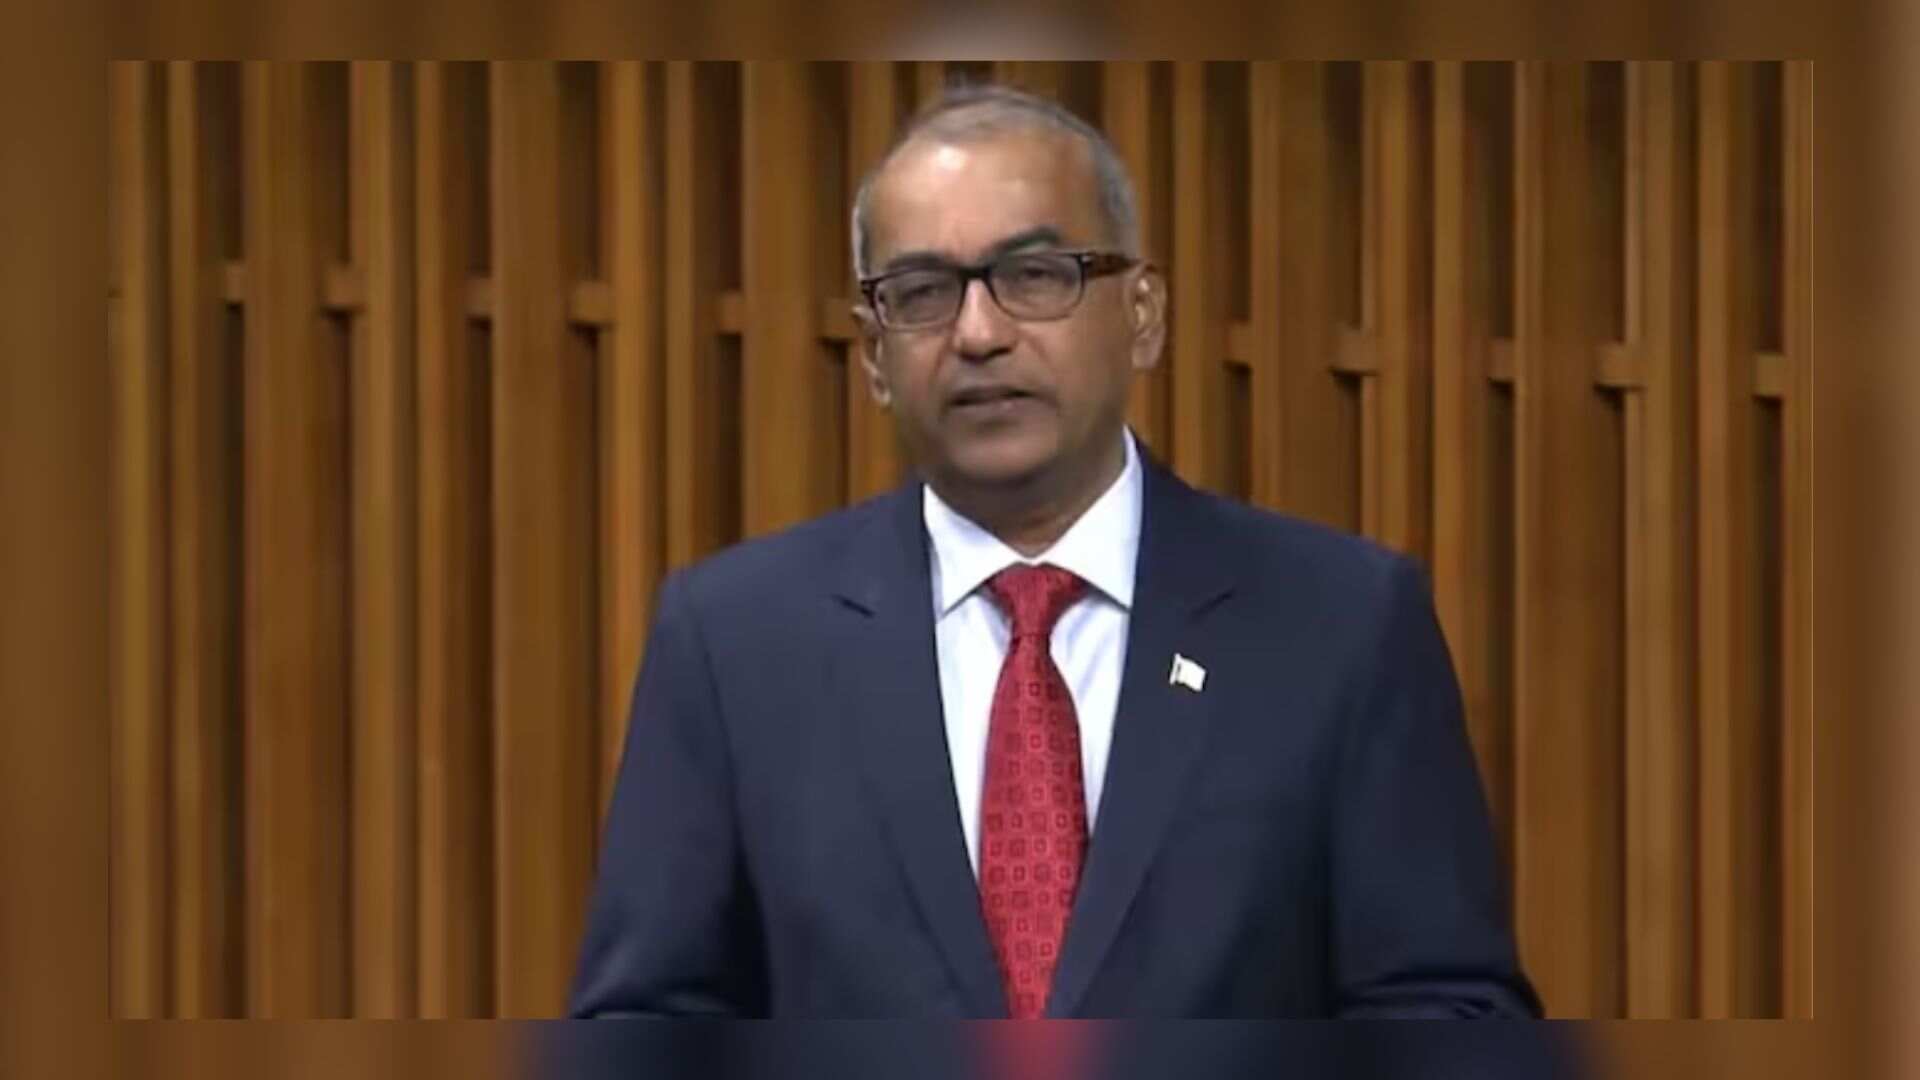 MP Chandra Arya: ‘Canada Is Our Home,’ Defends Hindu-Canadians Against Separatist Leader’s Call